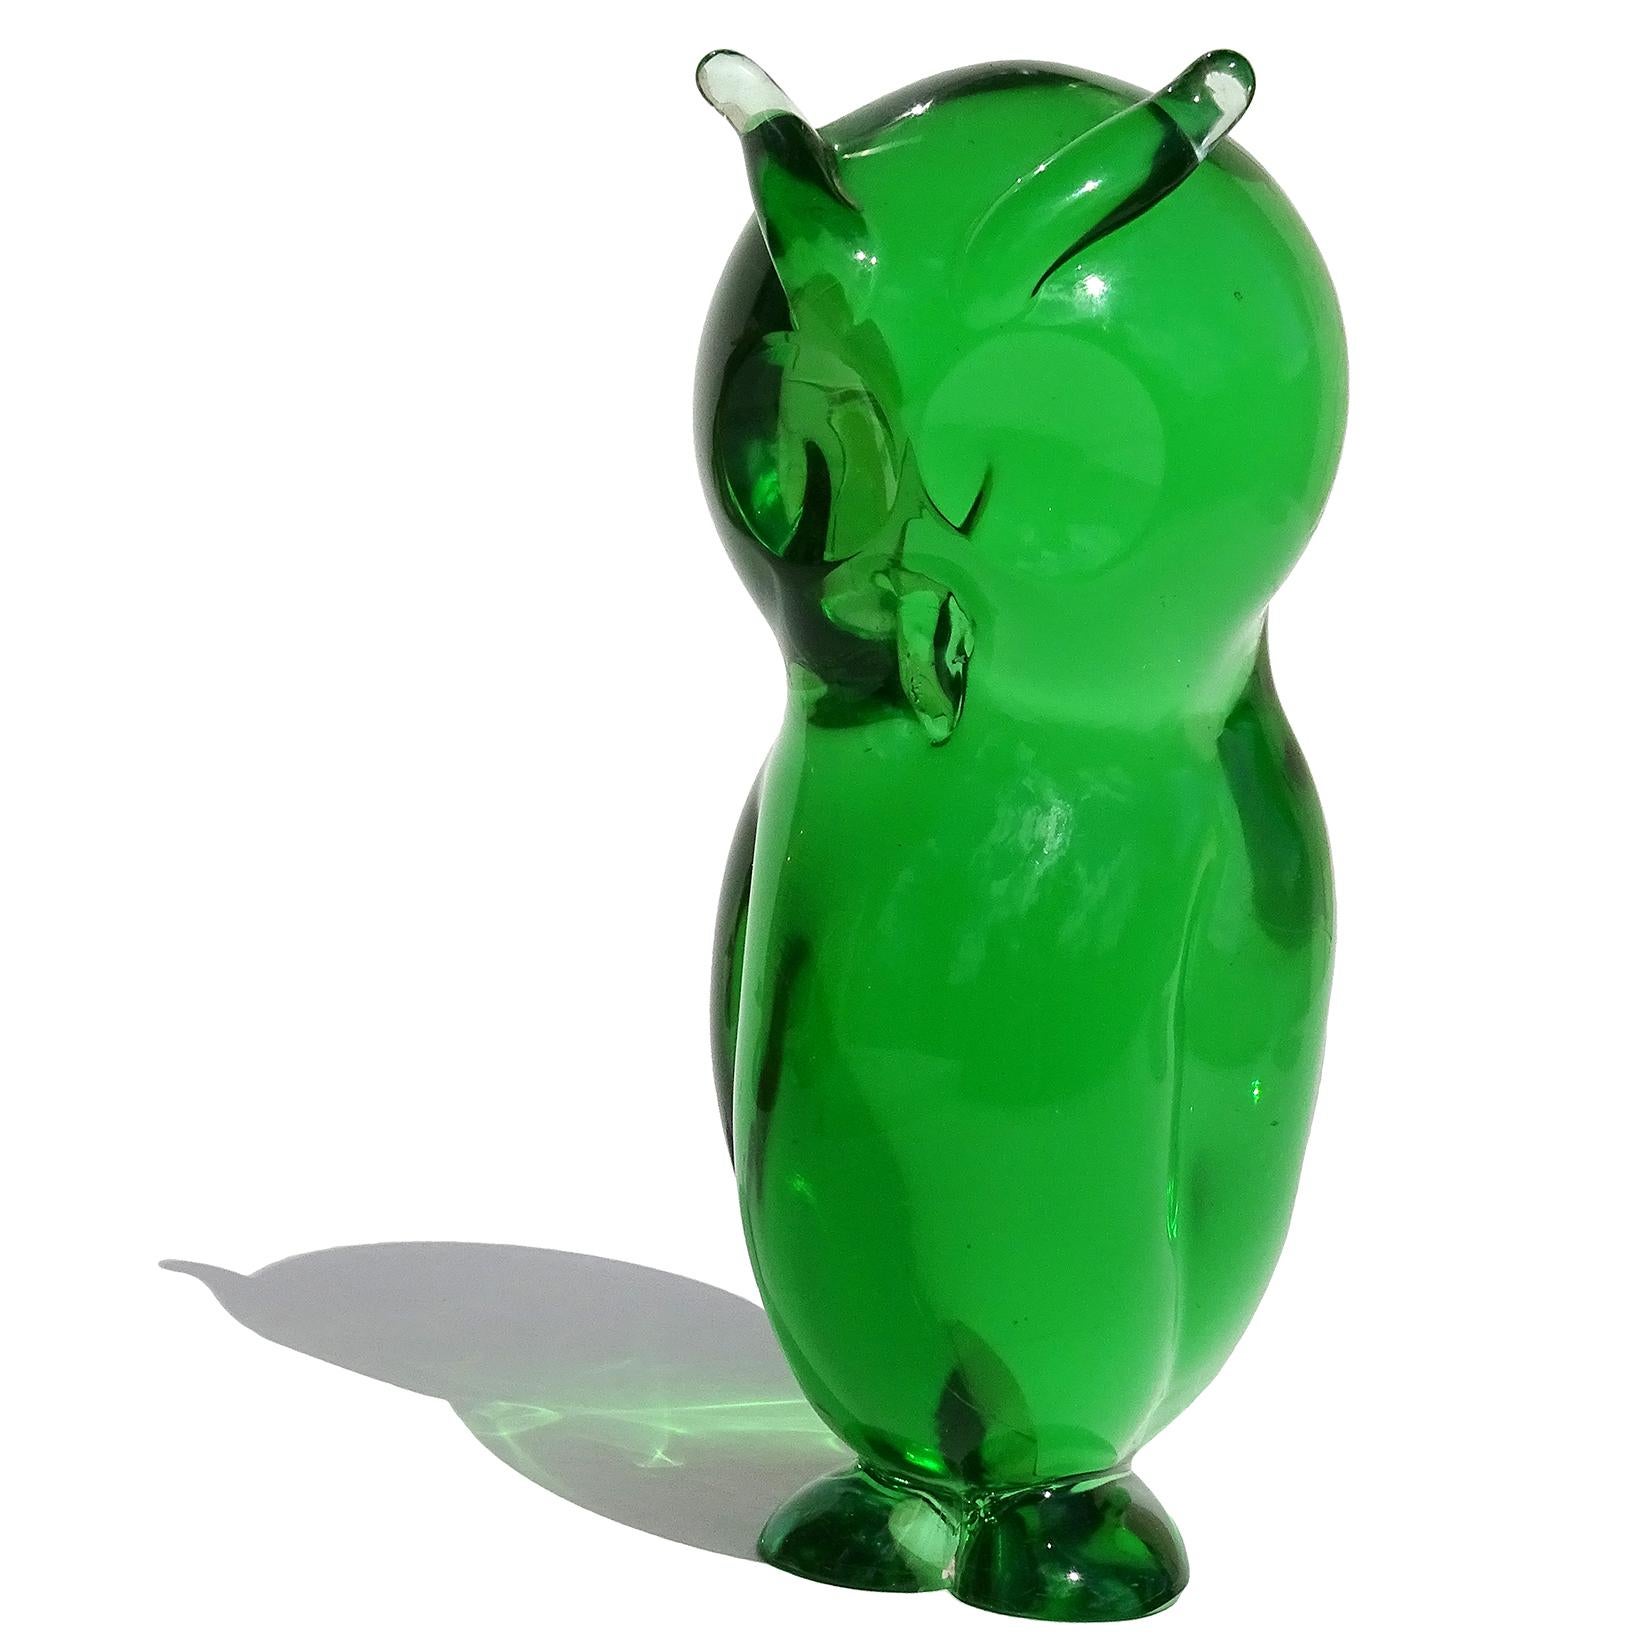 Beautiful vintage Murano hand blown Sommerso green Italian art glass horned owl bird sculpture. Documented to designer Archimede Seguso. I have personally owned another owl identical to this piece, in a different color, with original Seguso labels.